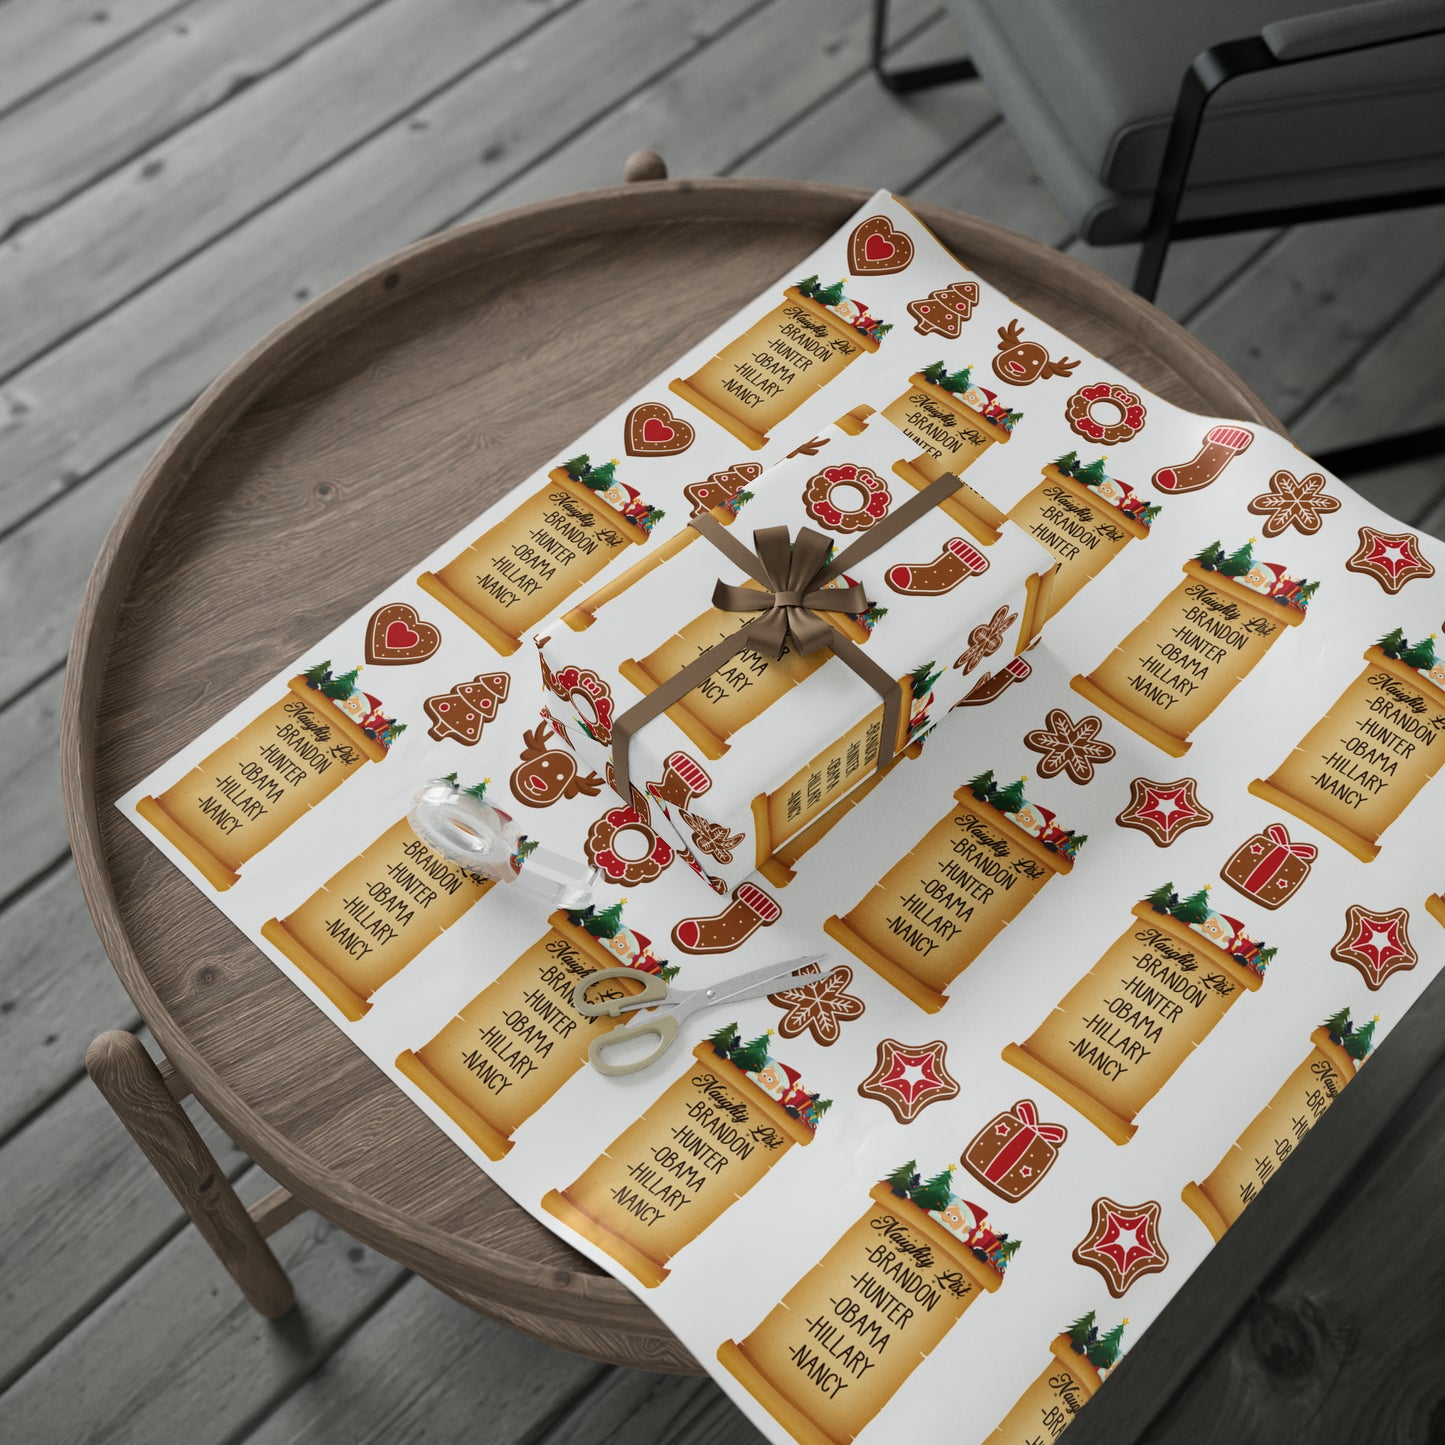 Great Funny Trump Wrapping Paper for Gifts - Pro Trump Naughty List Gingerbread Christmas Gift Wrap